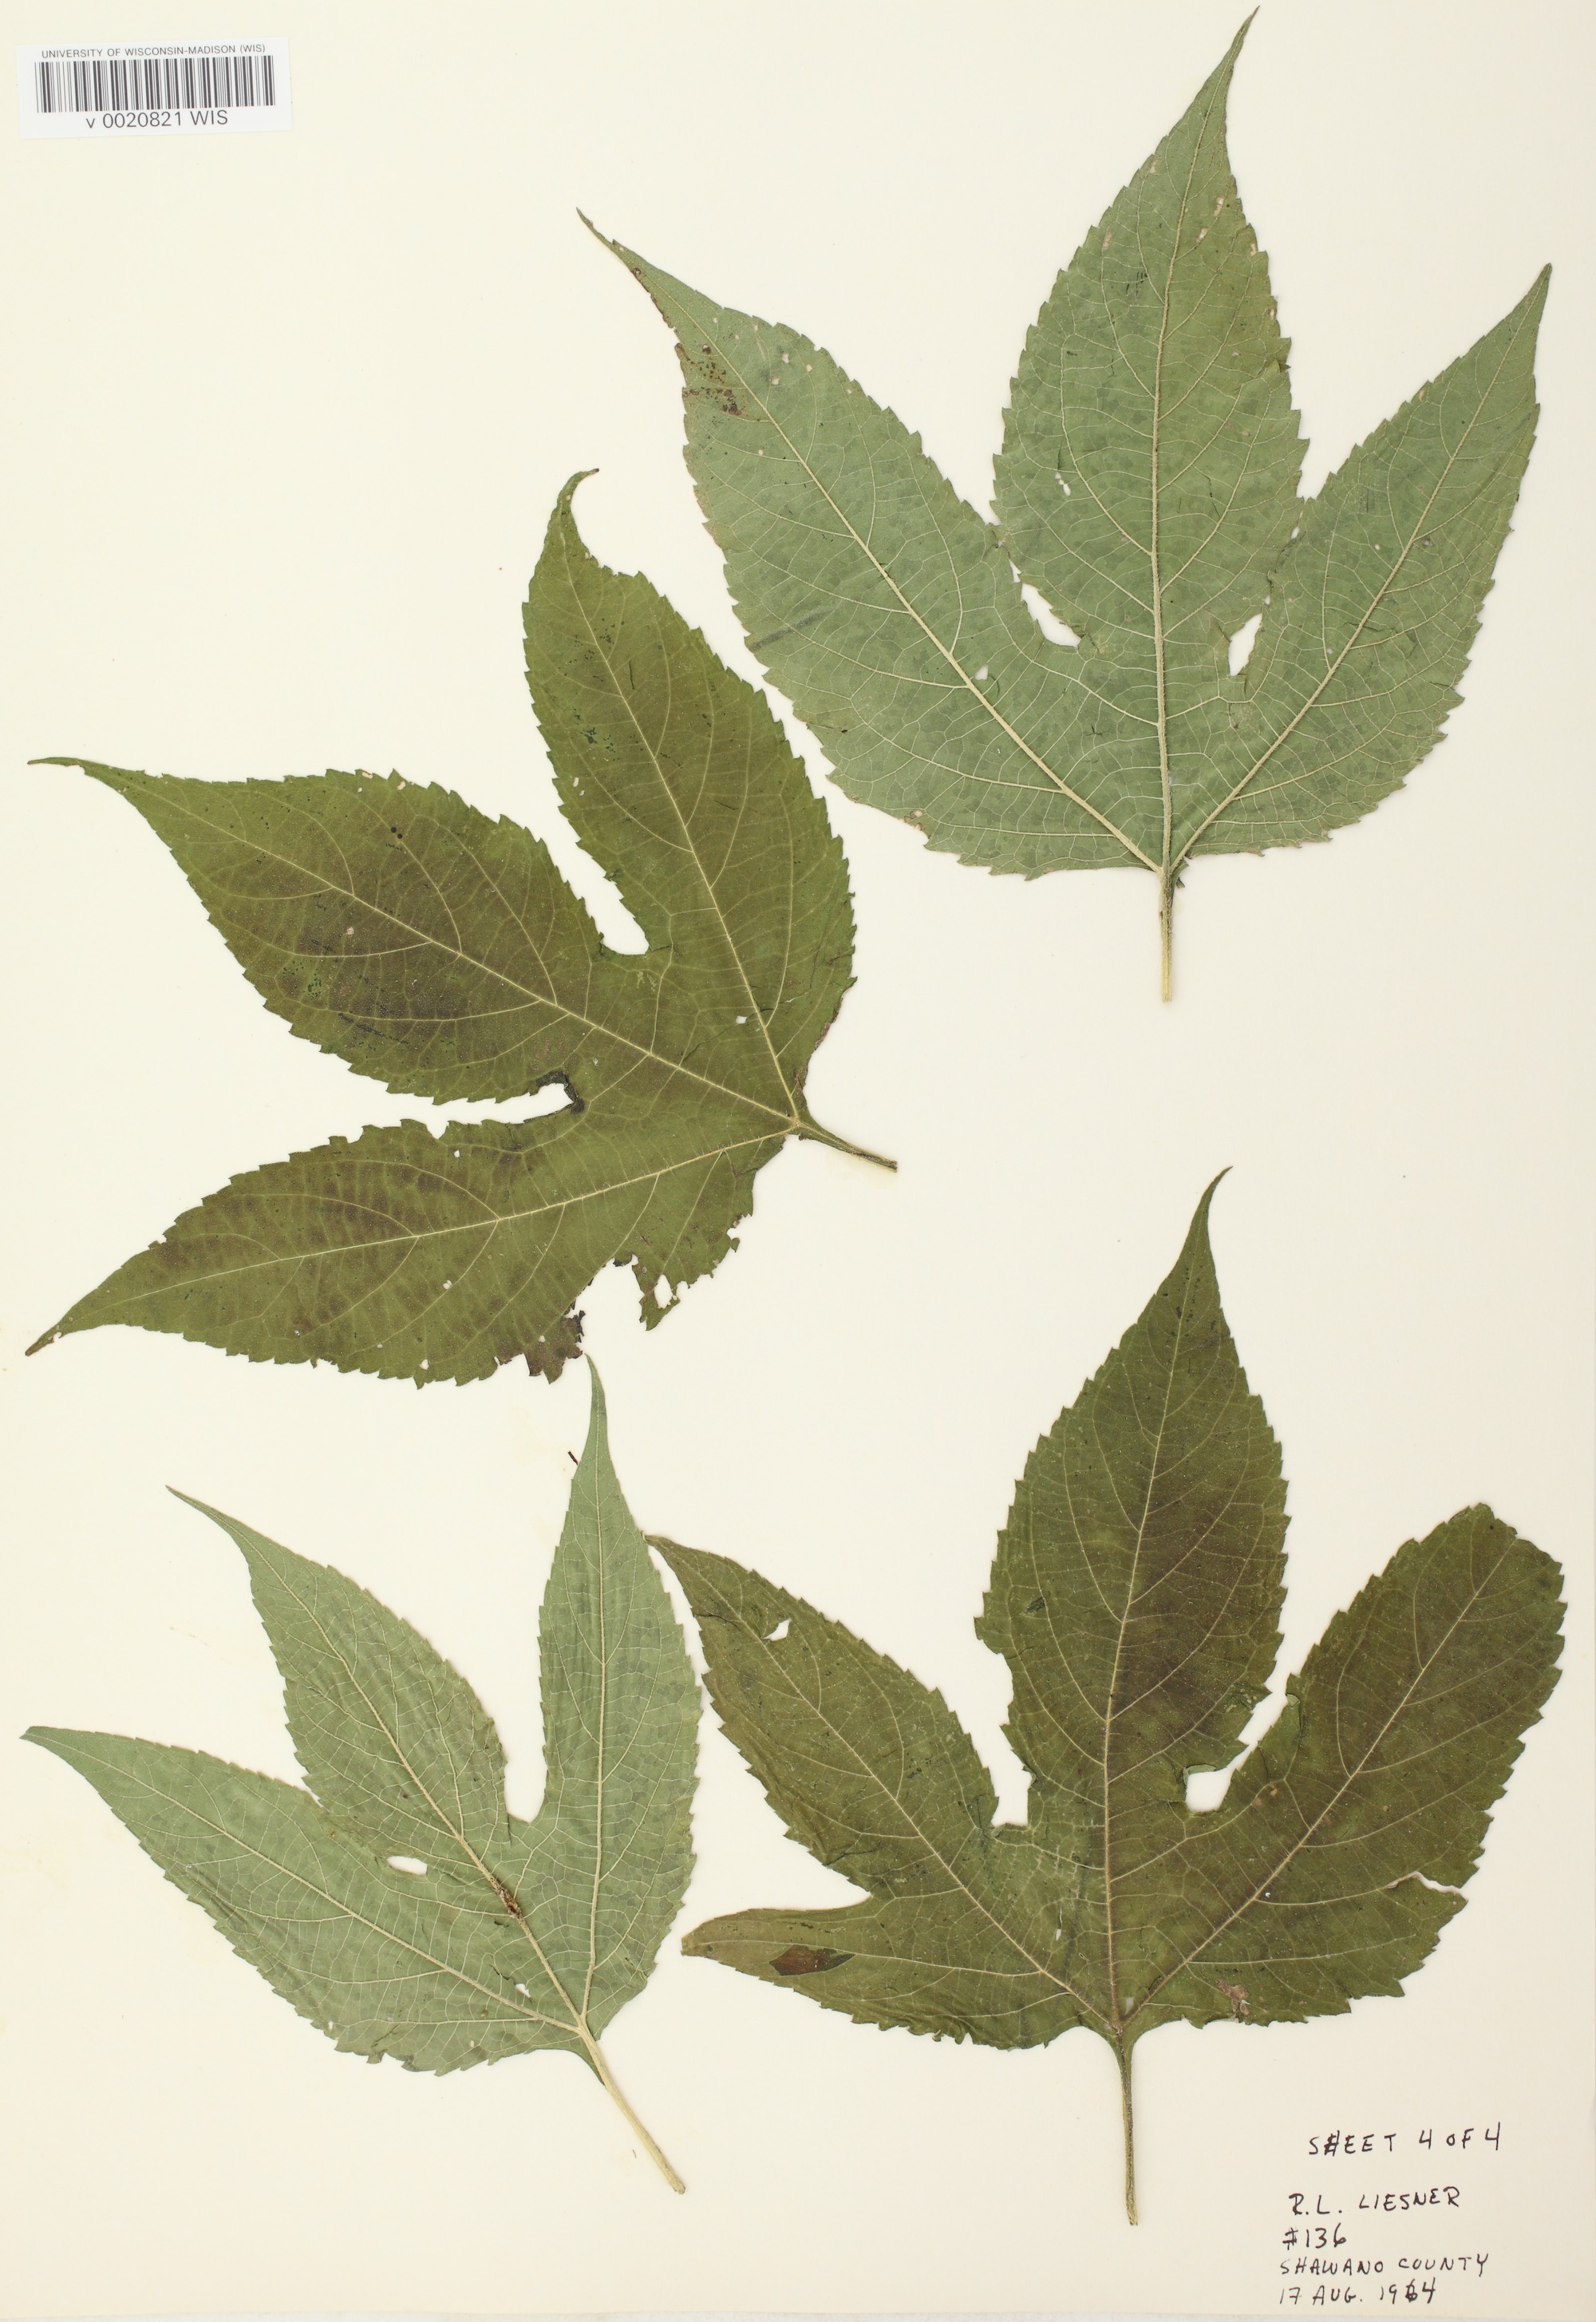  Giant Ragweed leave specimens collected in Shawano County, Wisconsin in August 17, 1964.